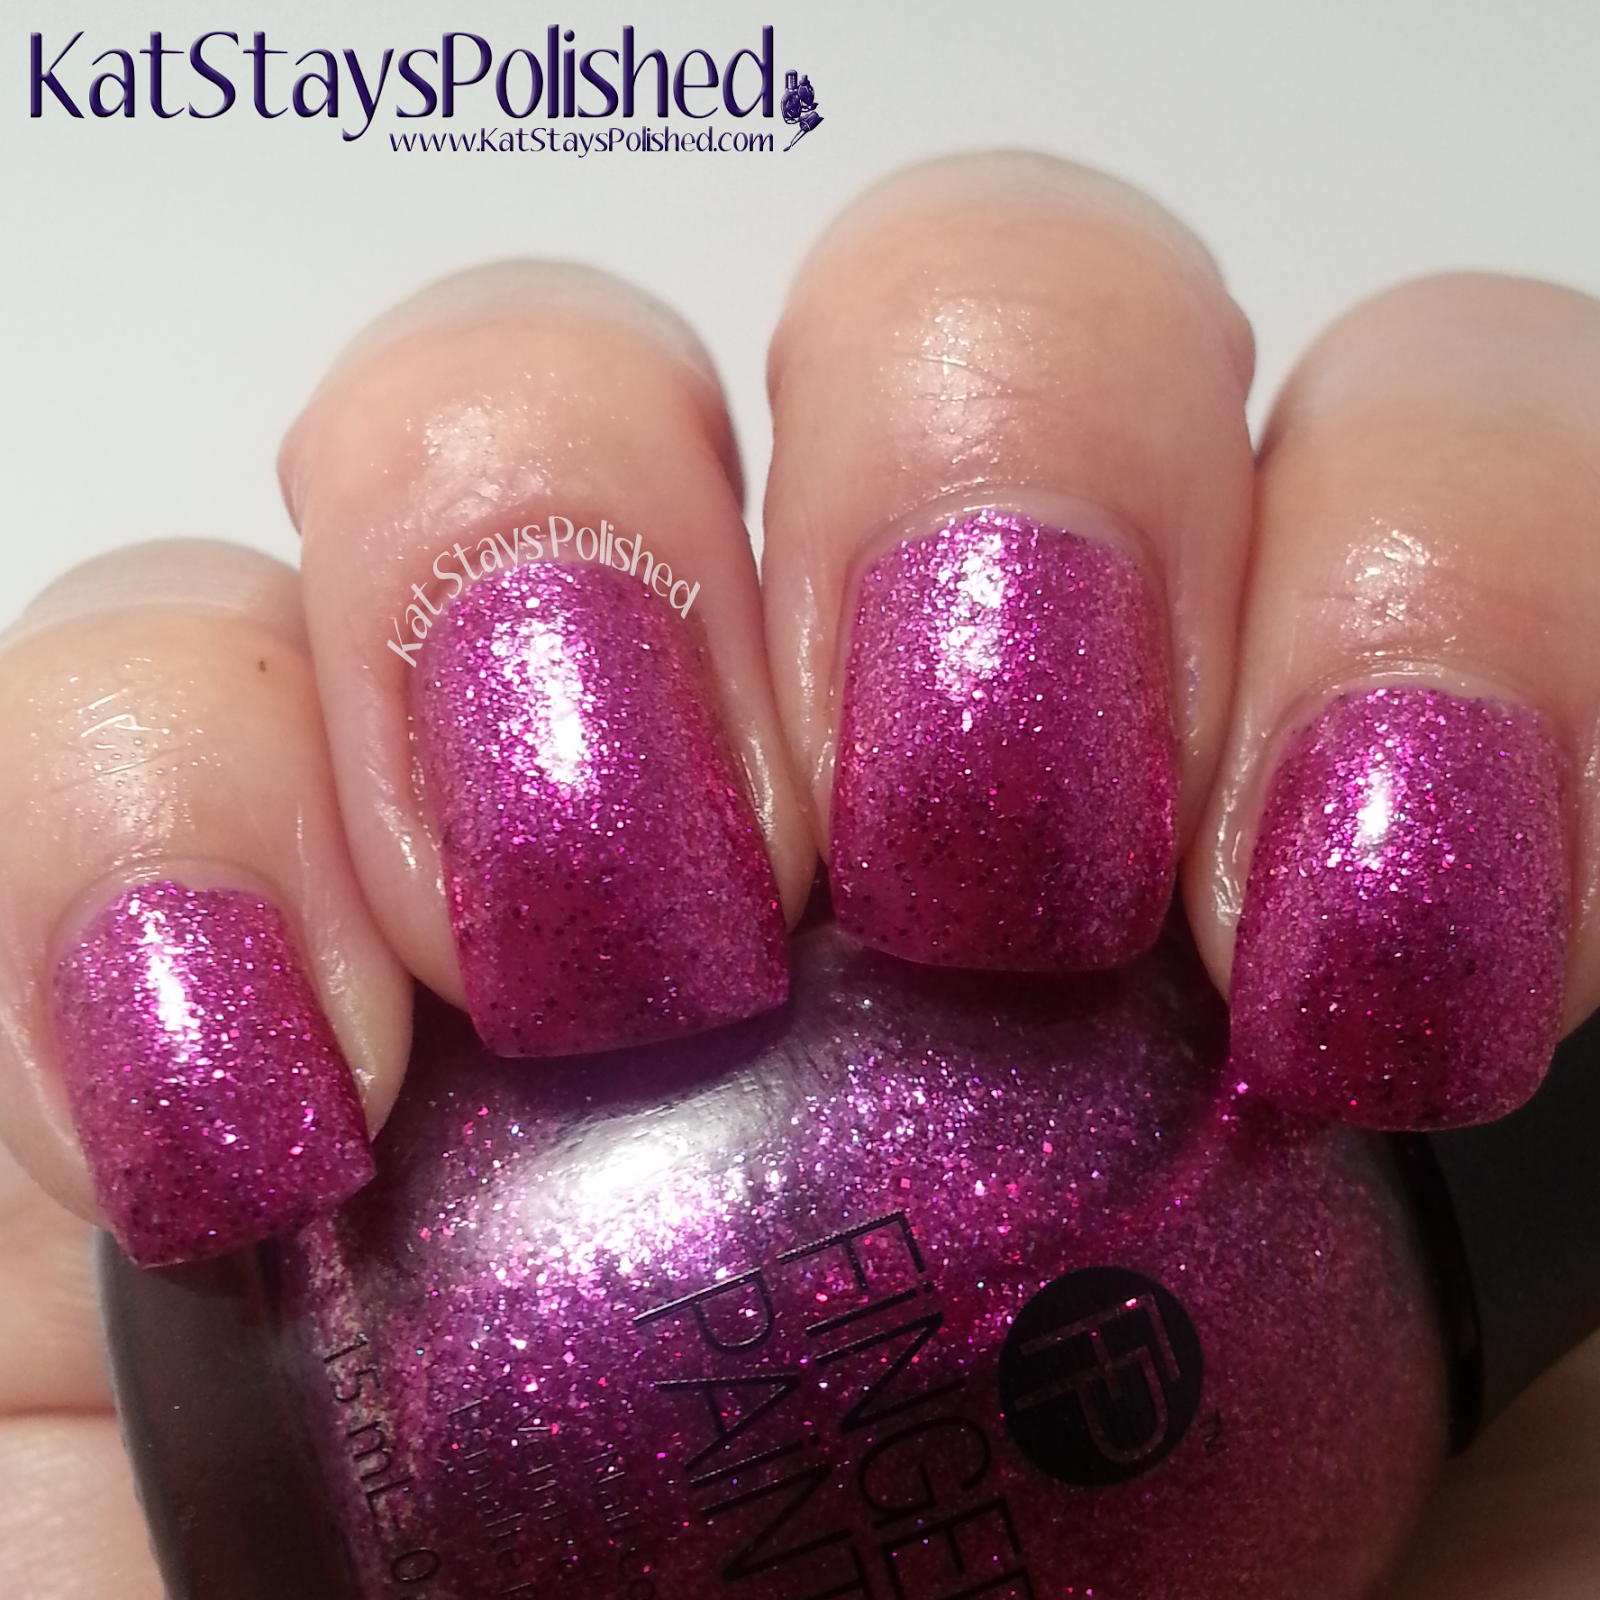 FingerPaints NEW for 2015 - Color Me Abstract | Kat Stays Polished